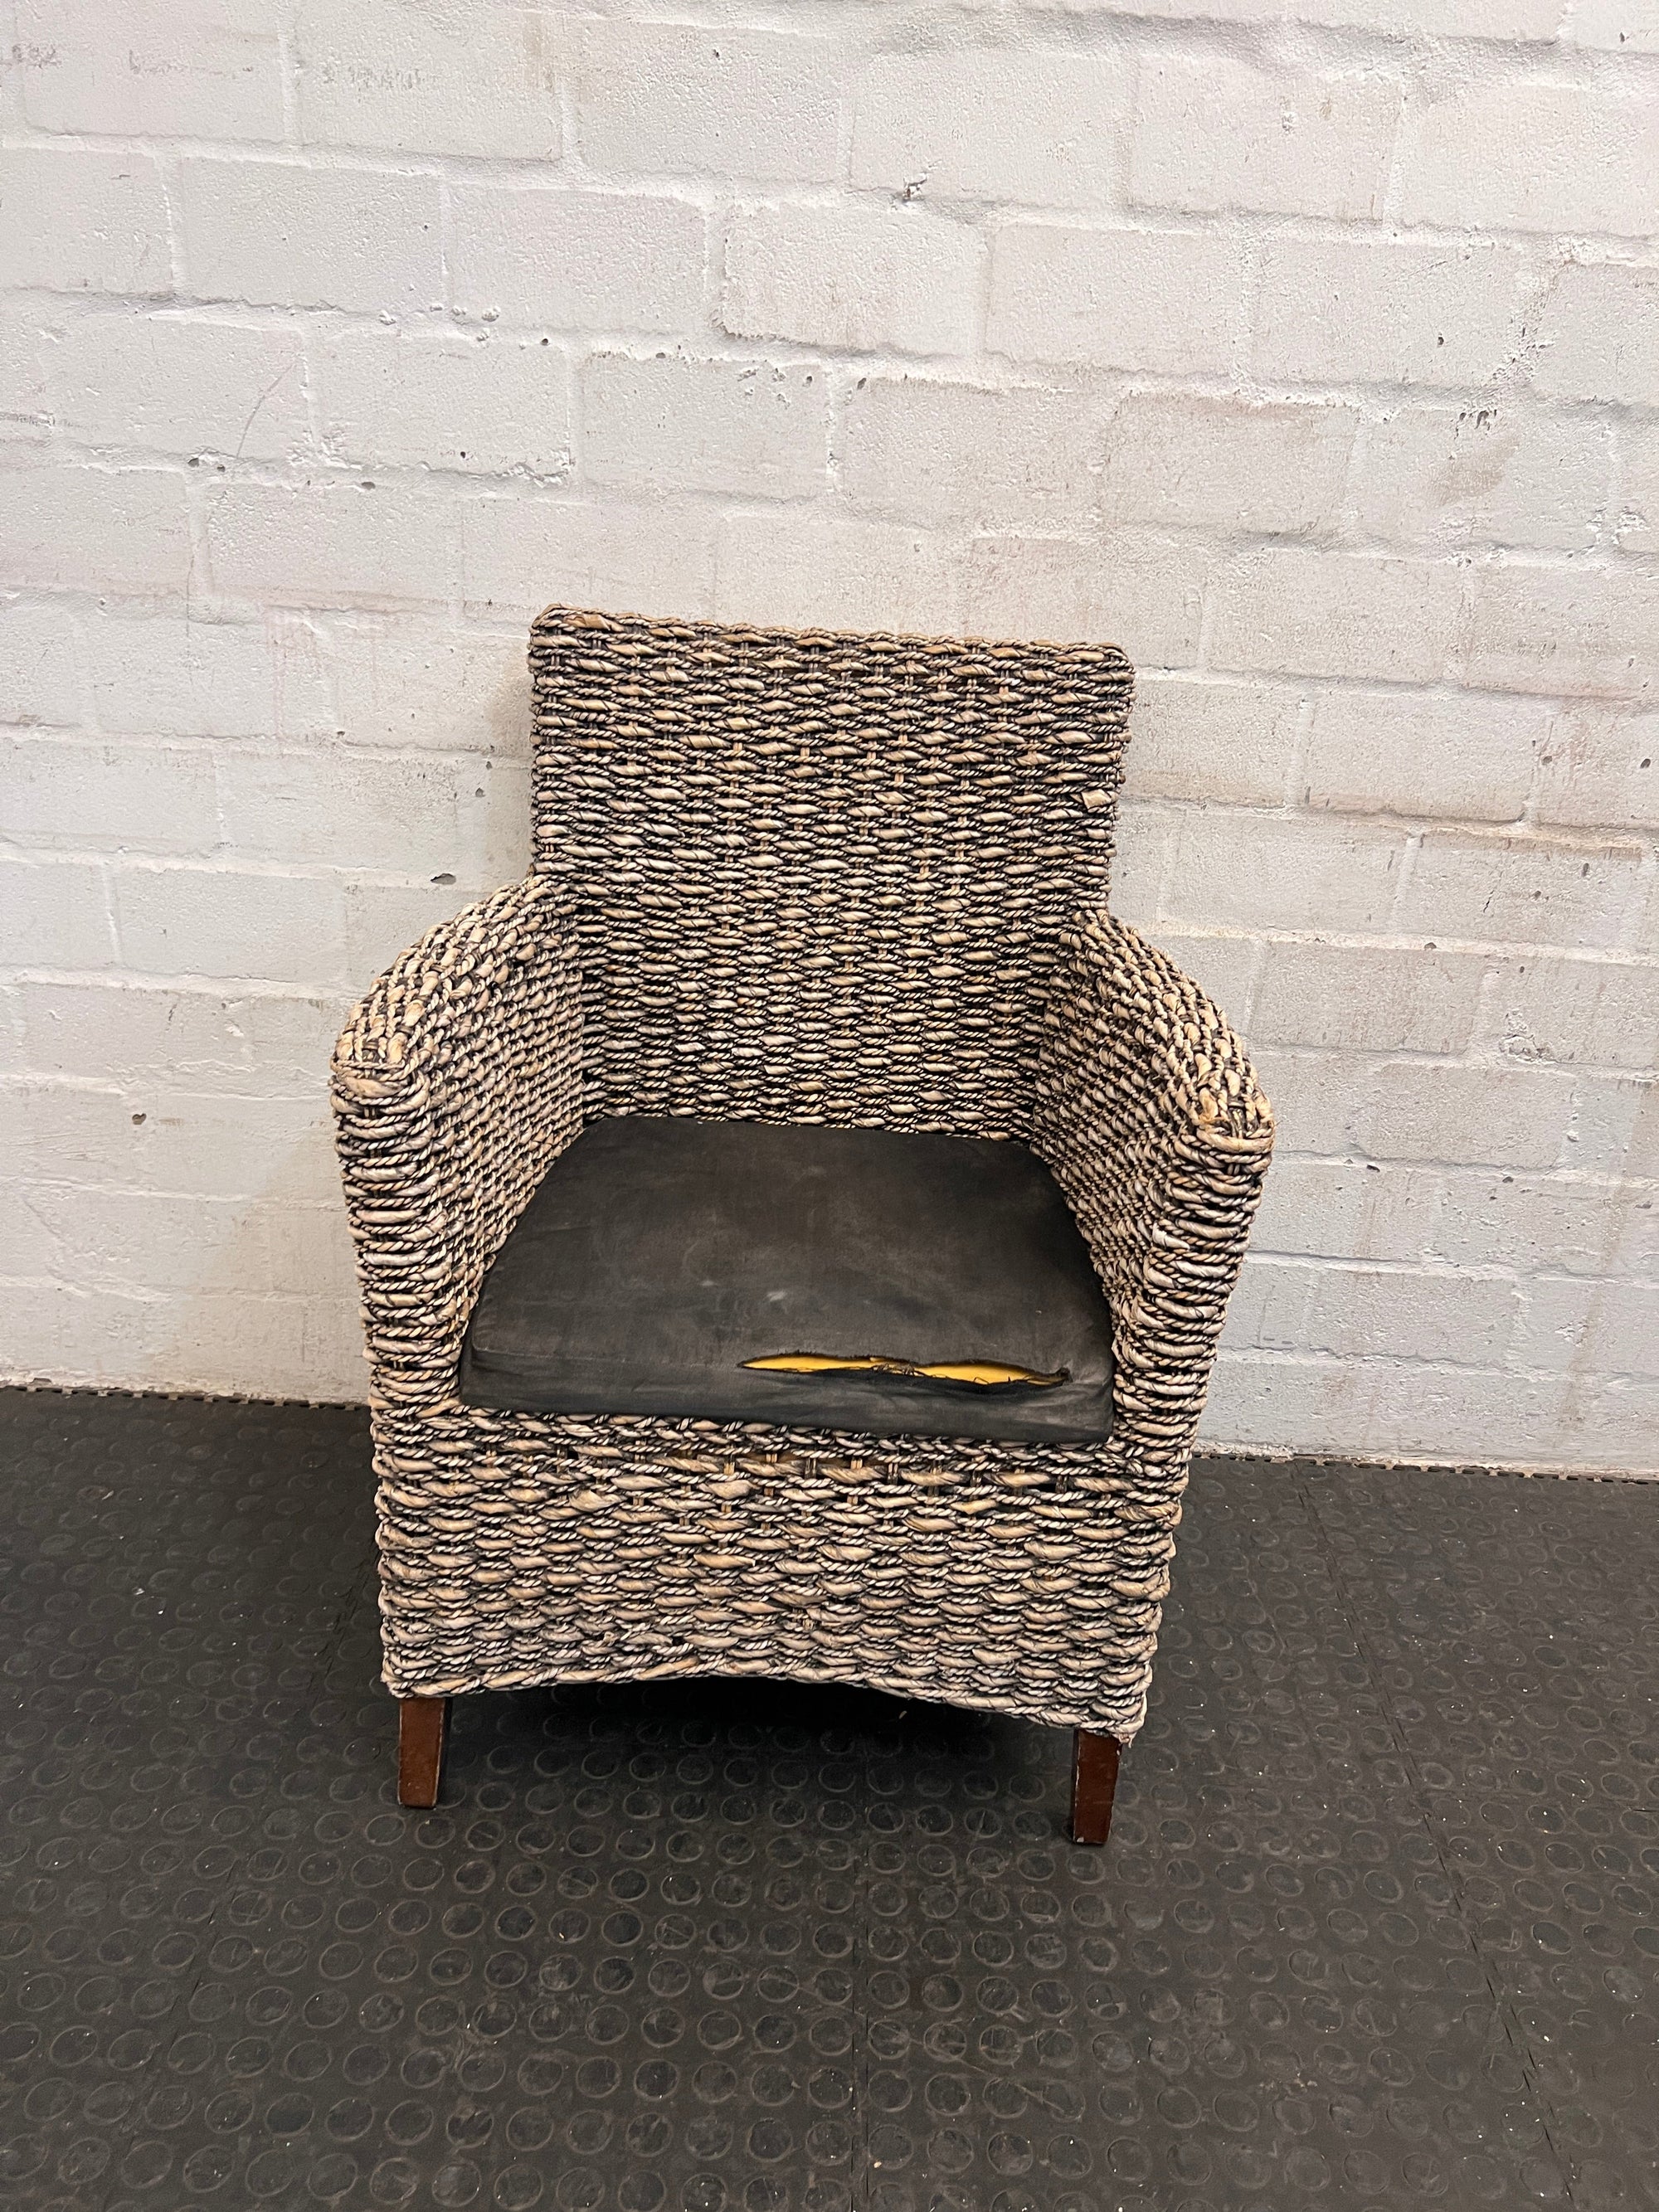 Wicker One Seater Sofa with Black Cushioned Seat (Cushion Needs Repair)